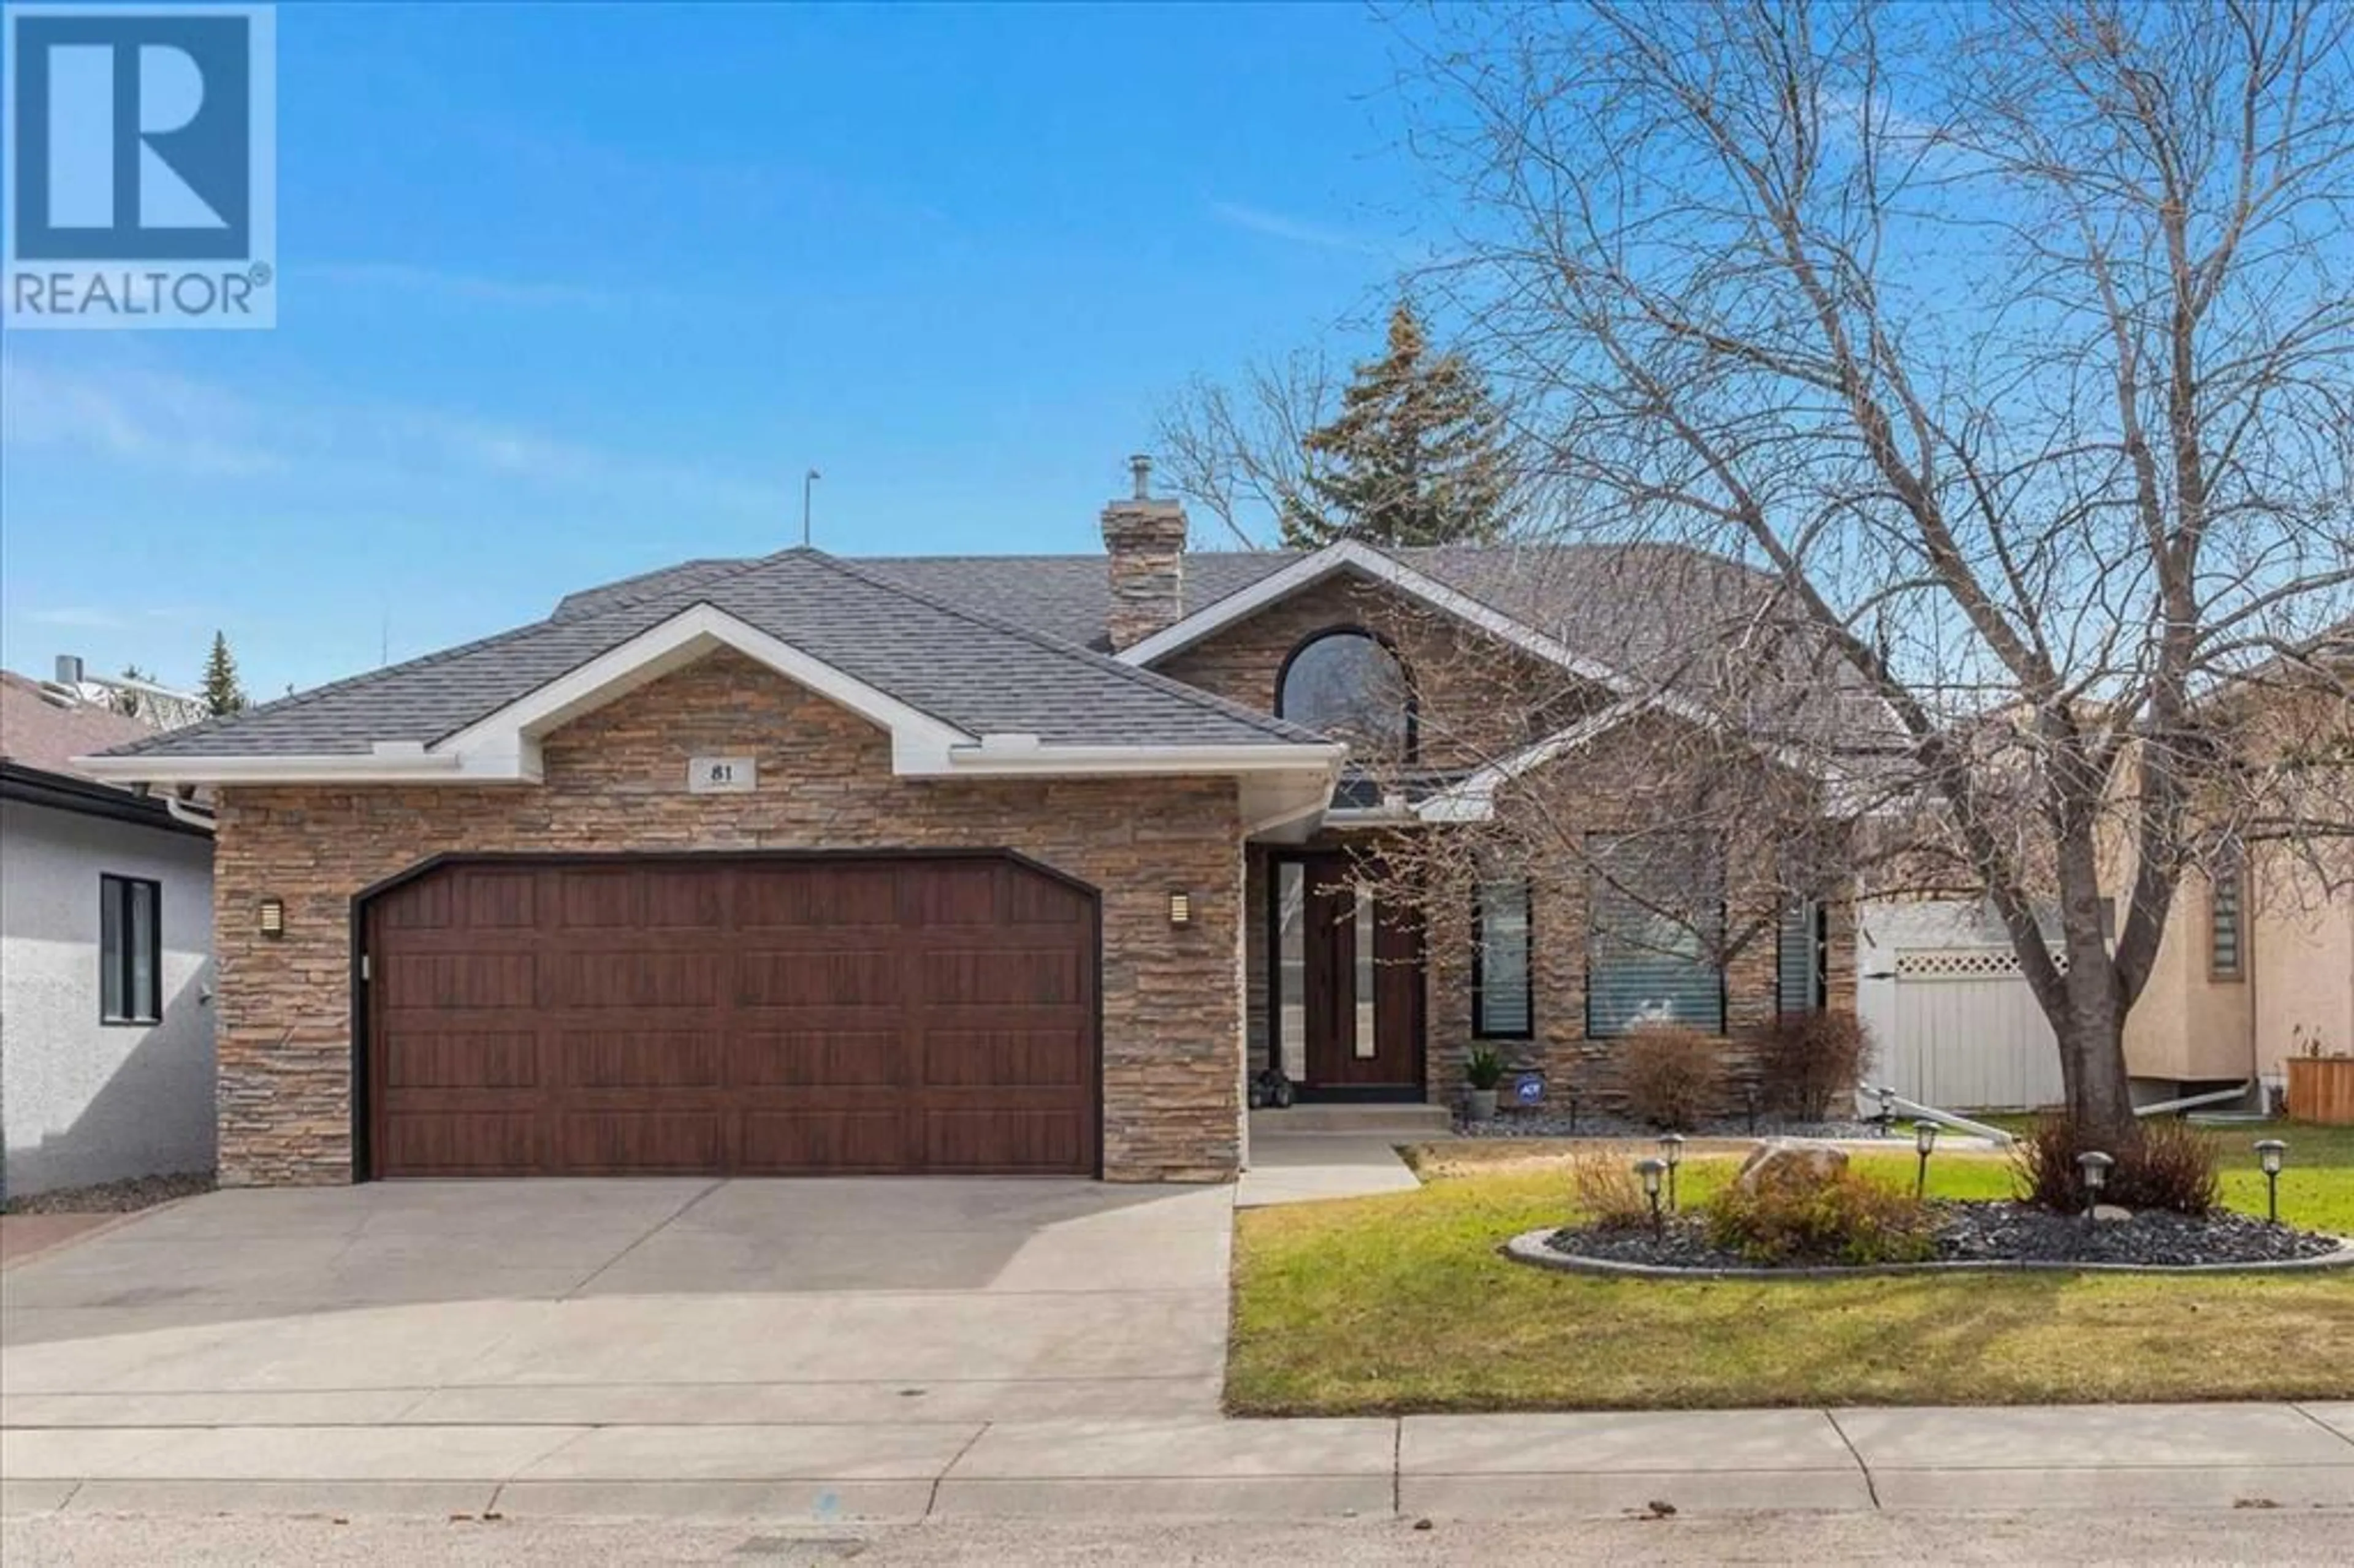 Home with brick exterior material for 81 Country Hills Close NW, Calgary Alberta T3K3Z2